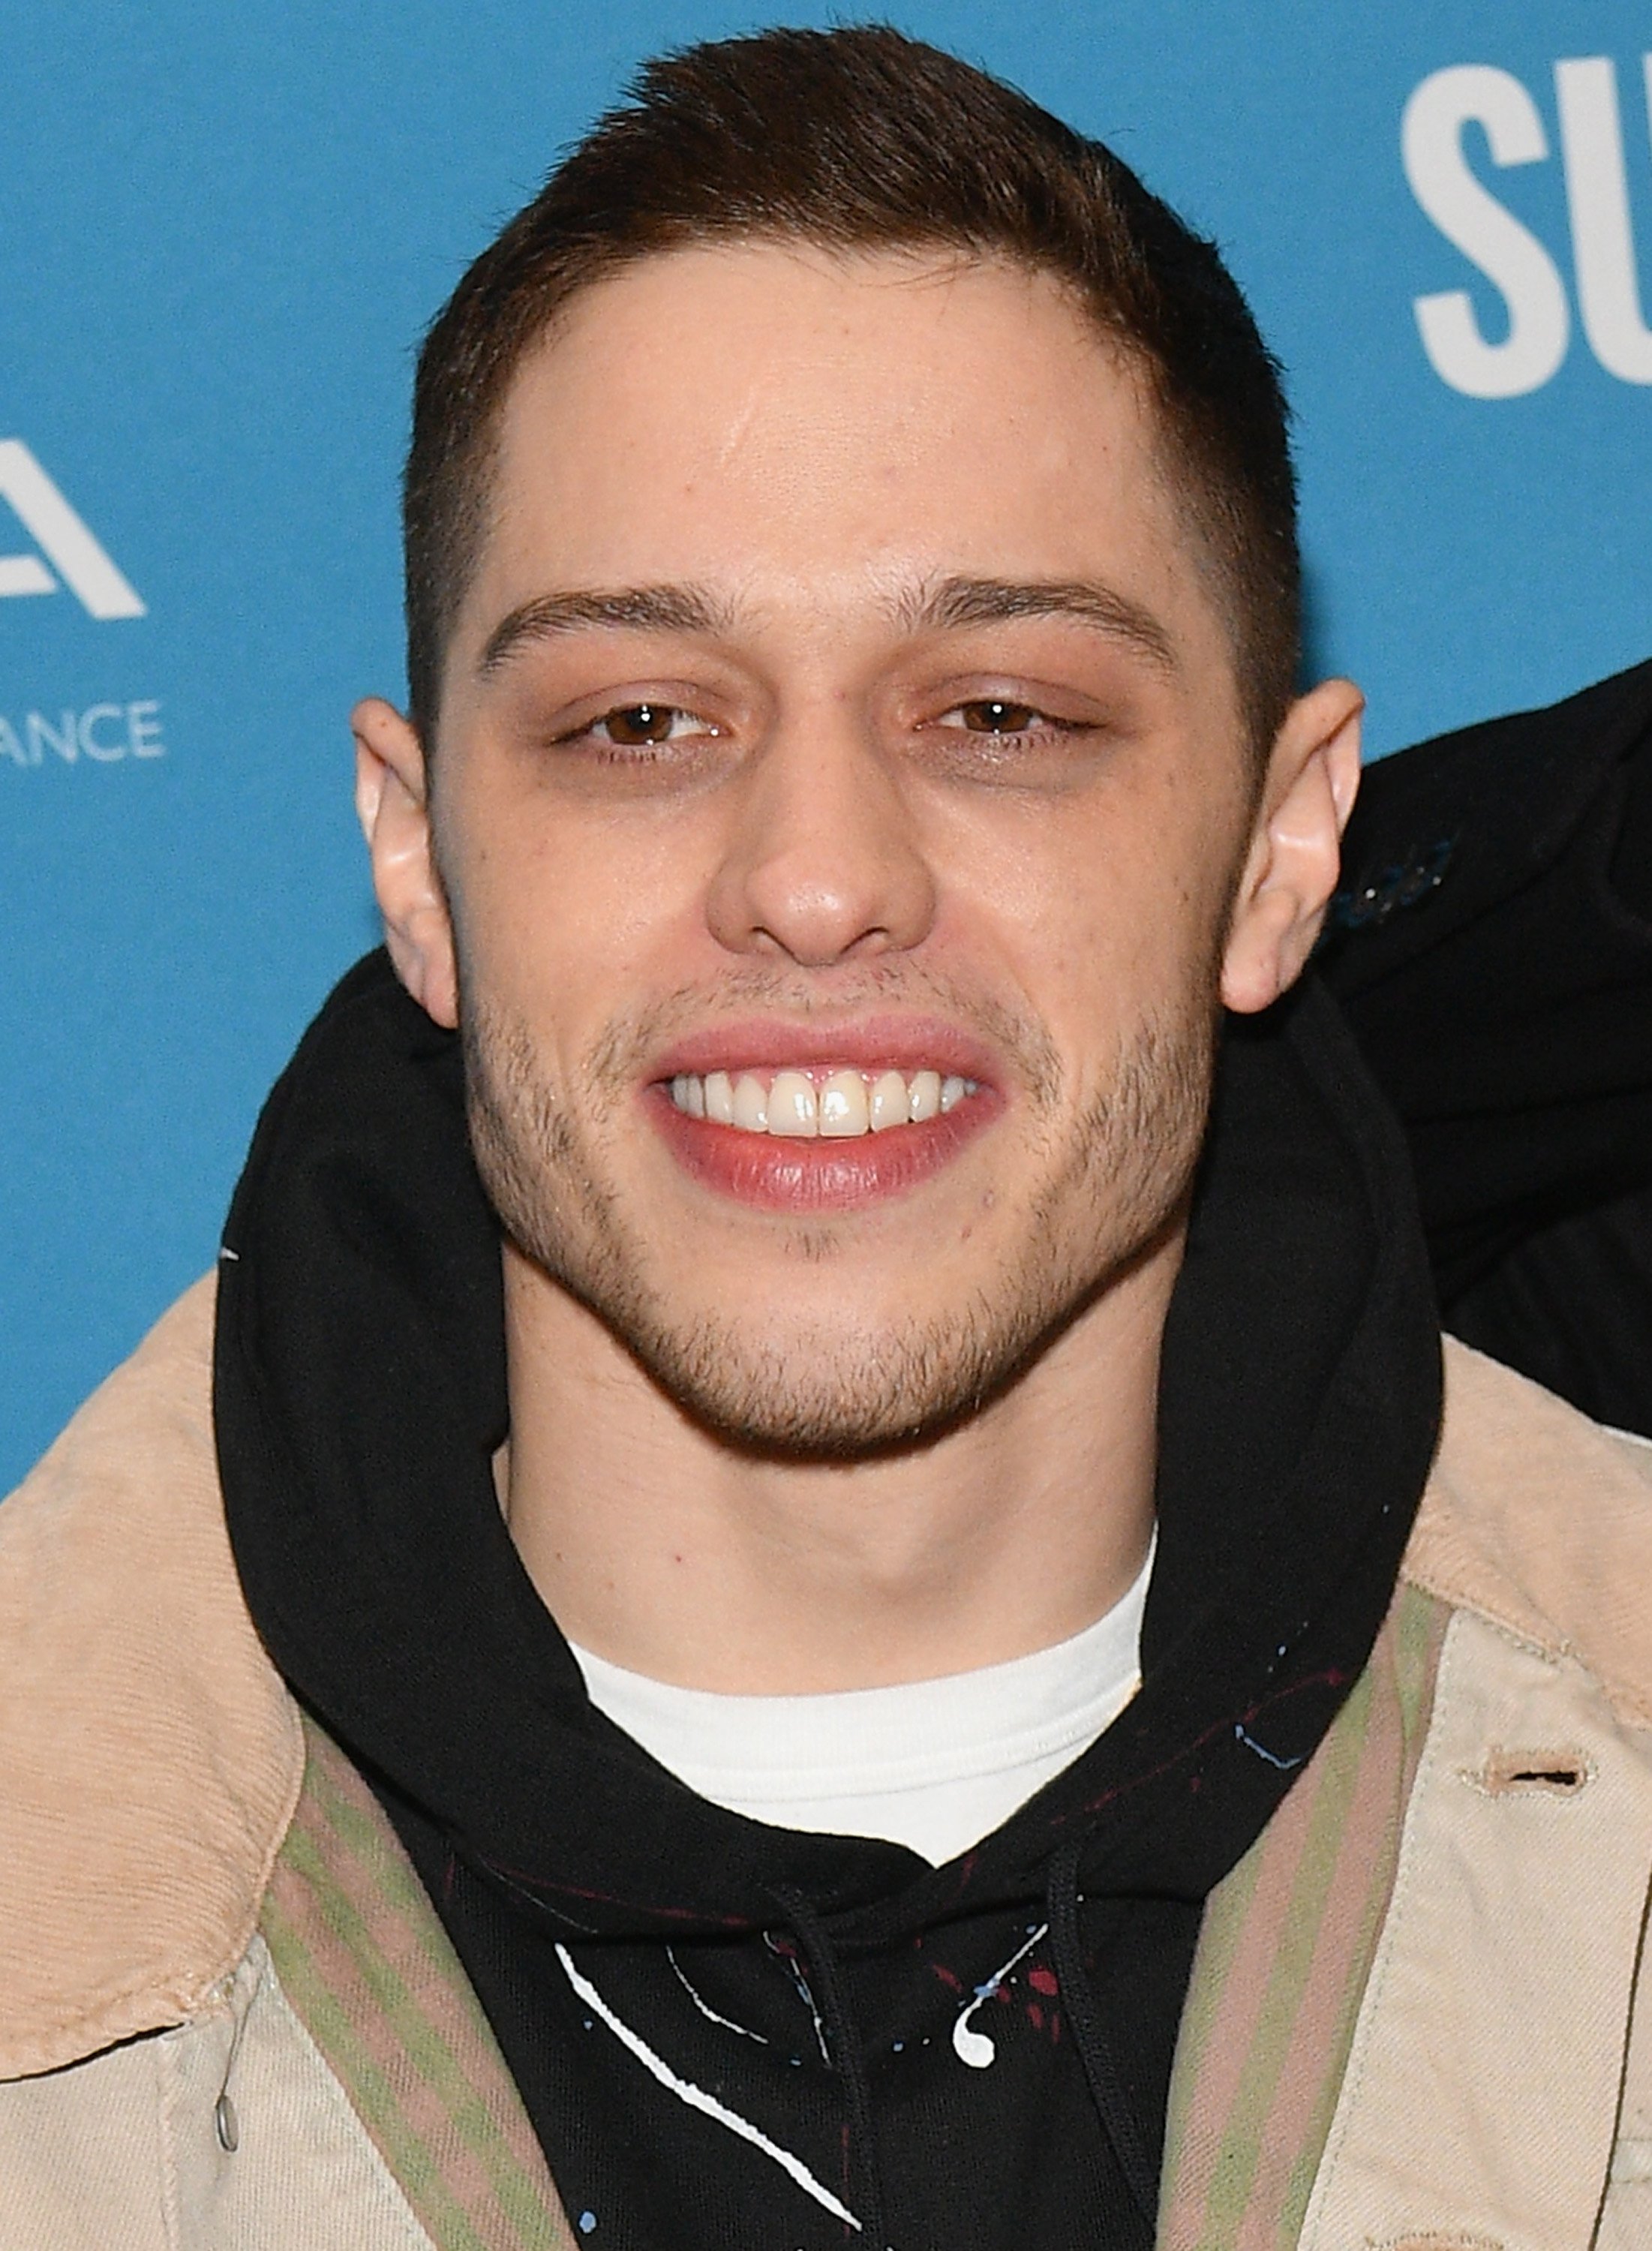 Pete Davidson attends the "Big Time Adolescence" Premiere during the 2019 Sundance Film Festival at Eccles Center Theatre in Park City, Utah on January 28, 2019. | Source: Getty Images